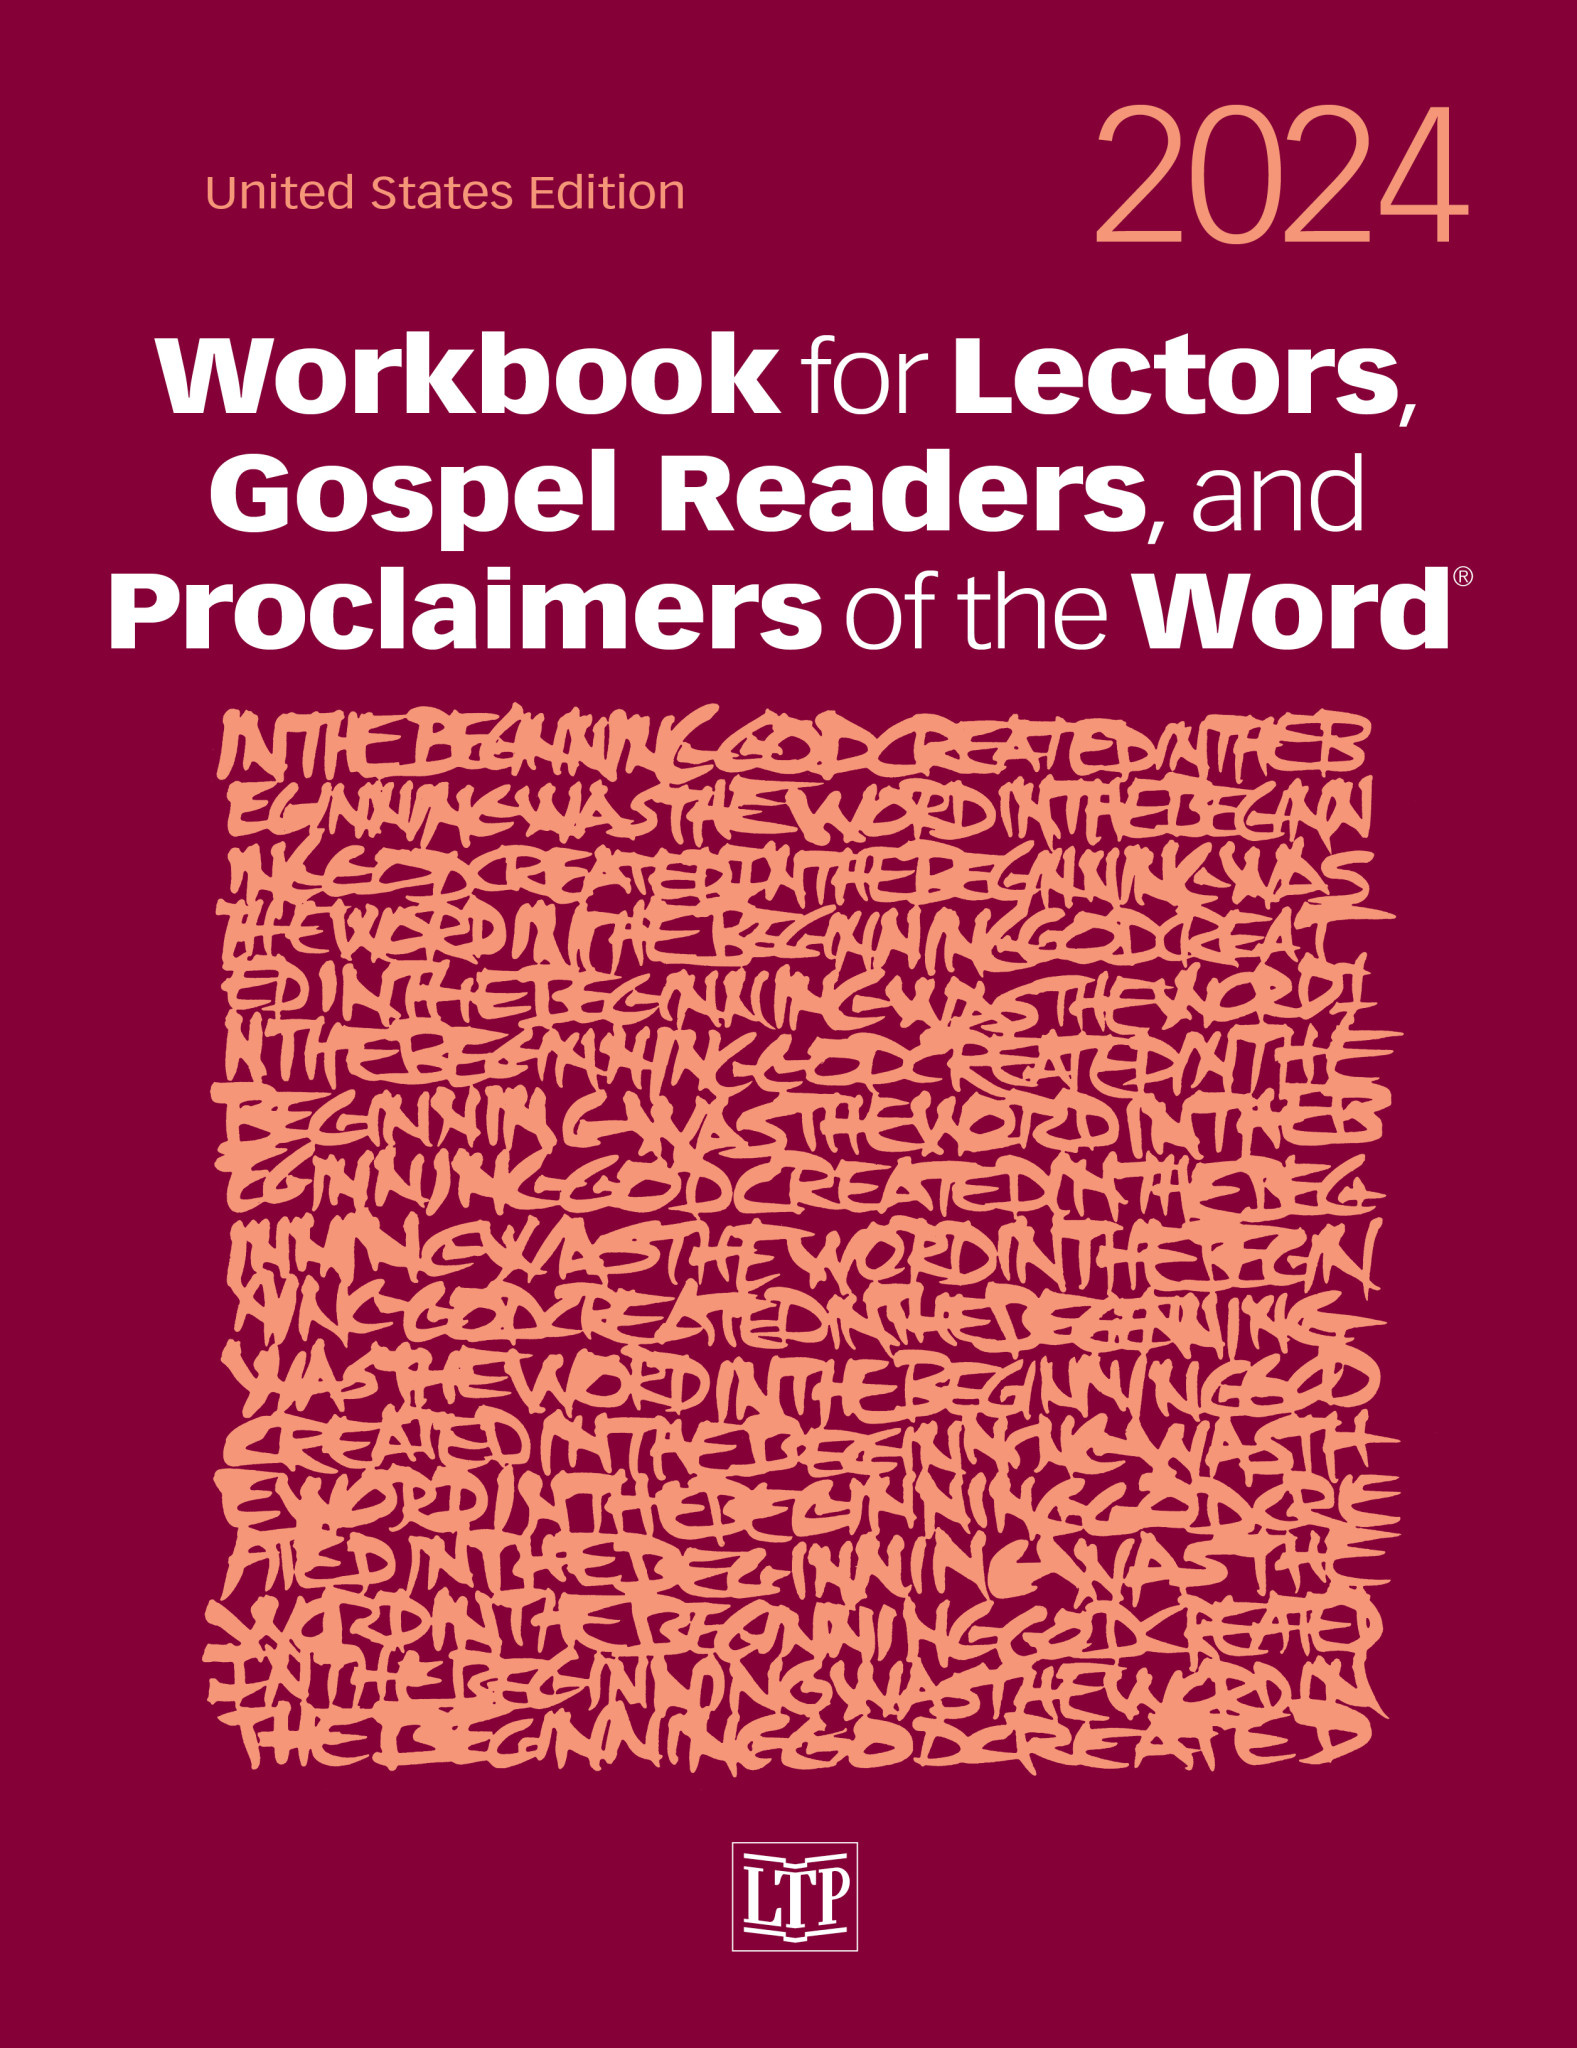 2024 Workbook for Lectors, Gospel Readers, & Proclaimers of the Word